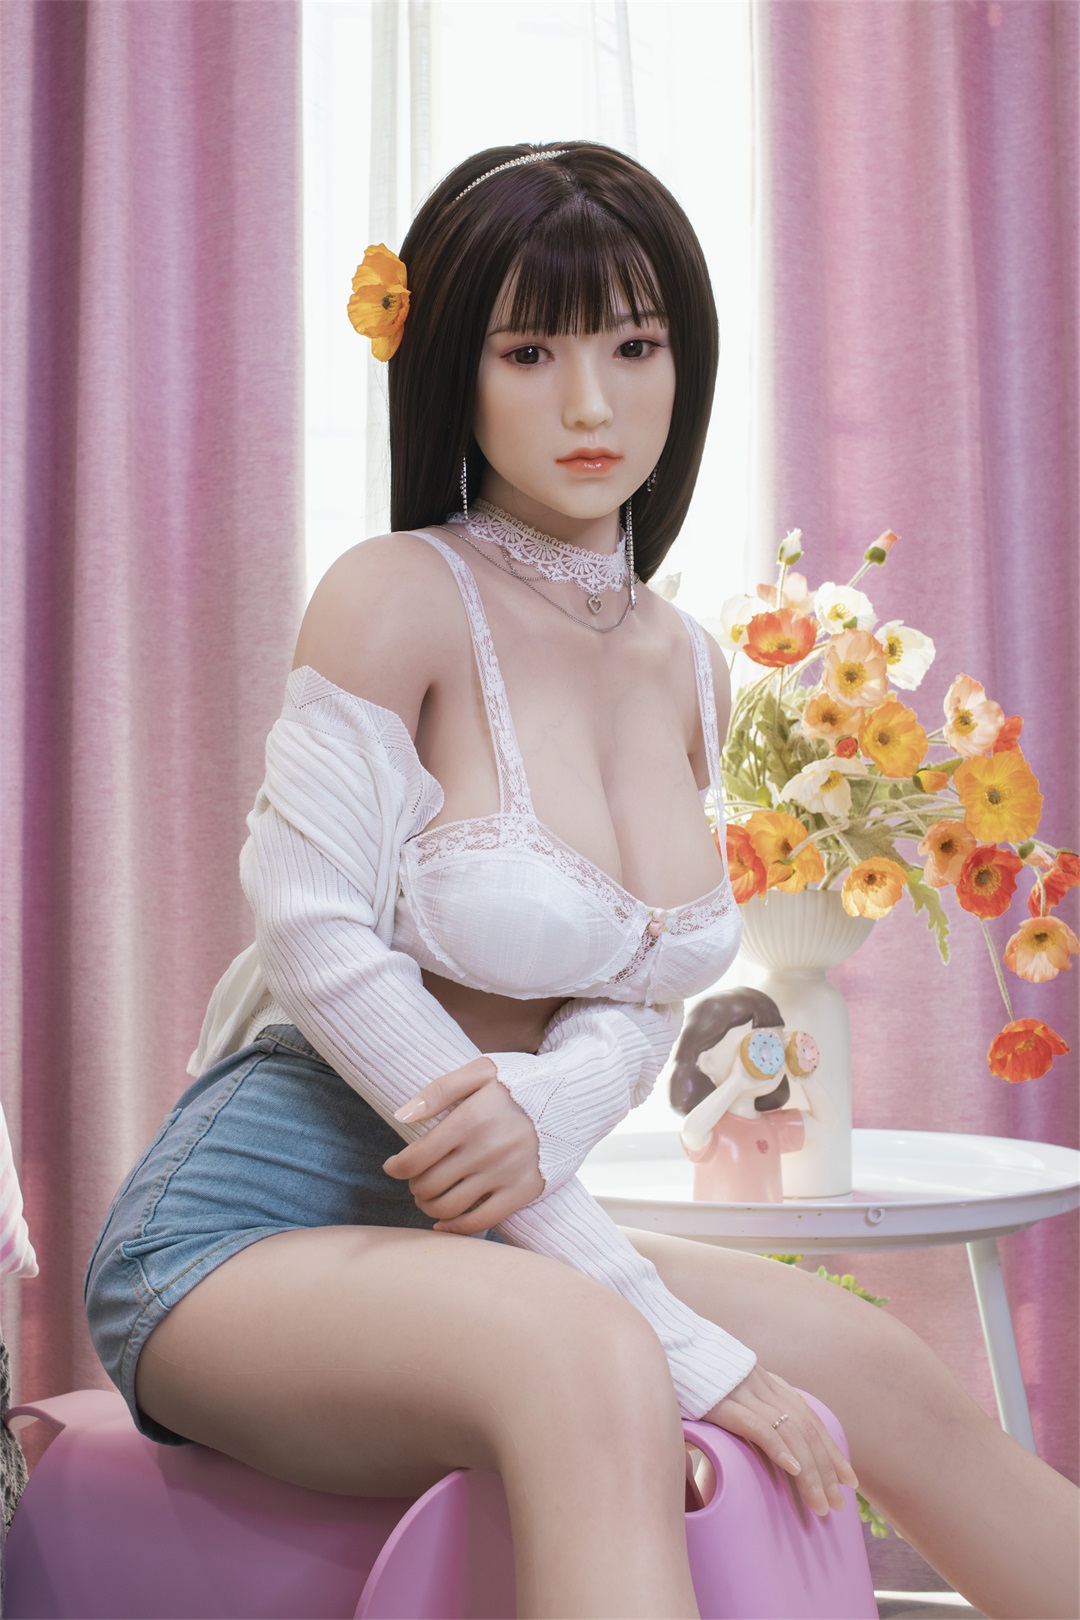 5ft 6/168cm Asian Style Sex Doll with realistic features-Meghan